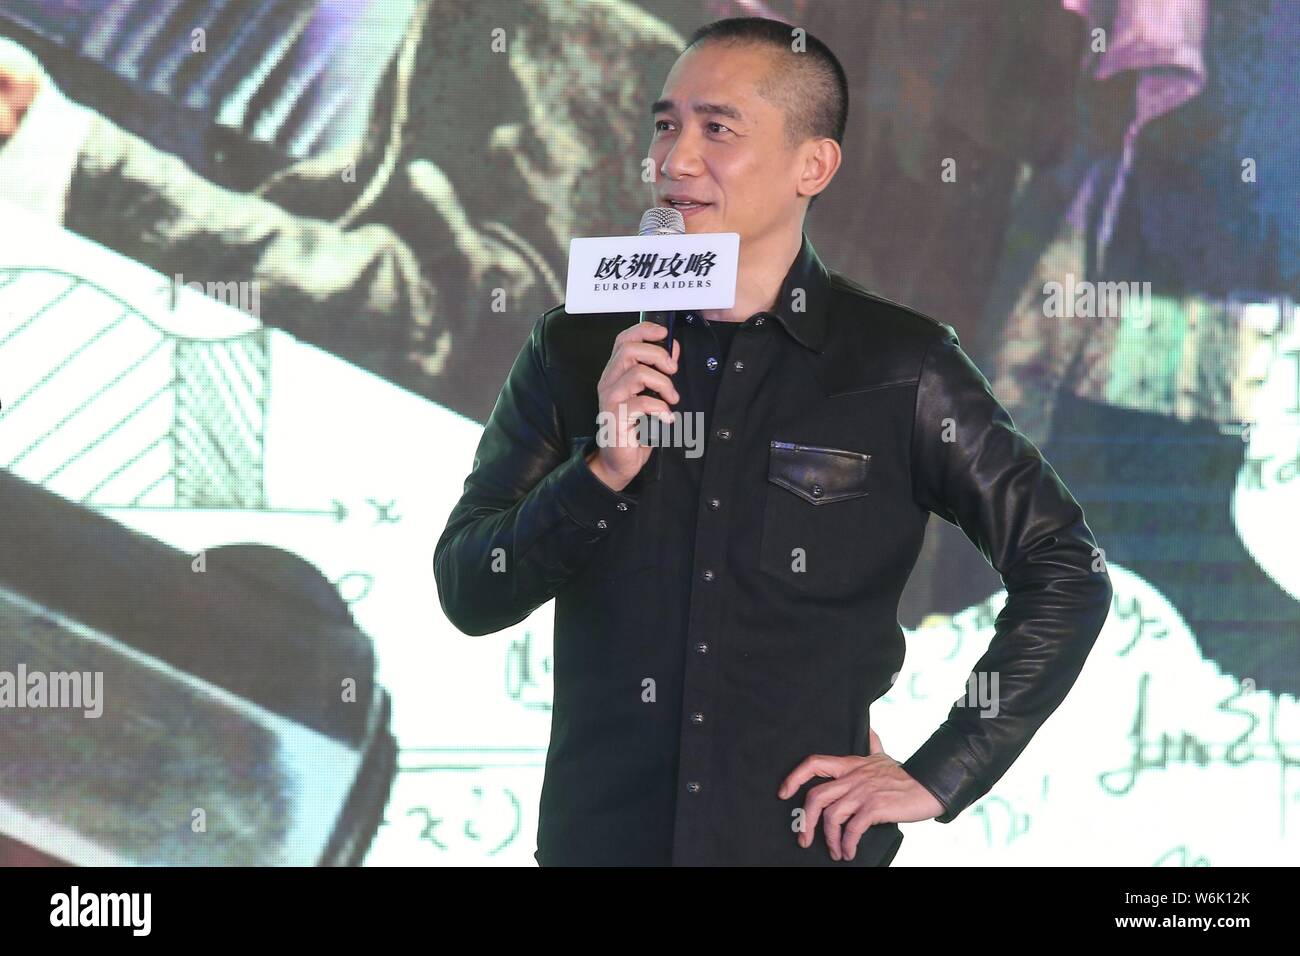 Hong Kong actor Tony Leung Chiu-wai attends a press conference for new movie 'Europe Raiders' in Beijing, China, 6 February 2018. Stock Photo